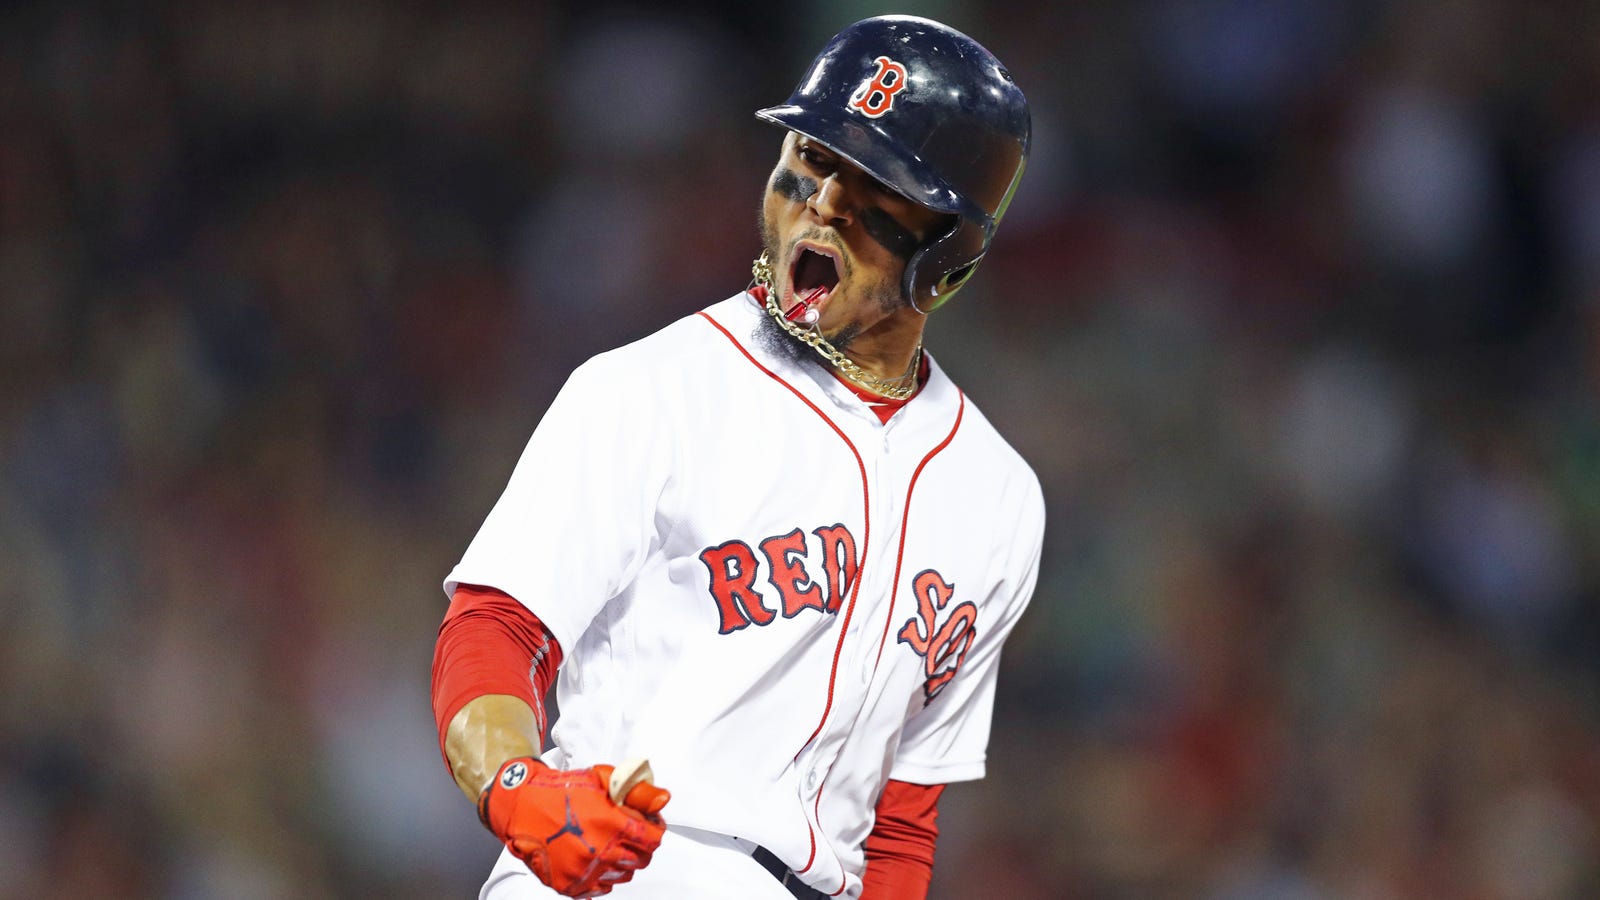 Mookie Betts Hit A Grand Slam For The Red Sox After 13 Pitches